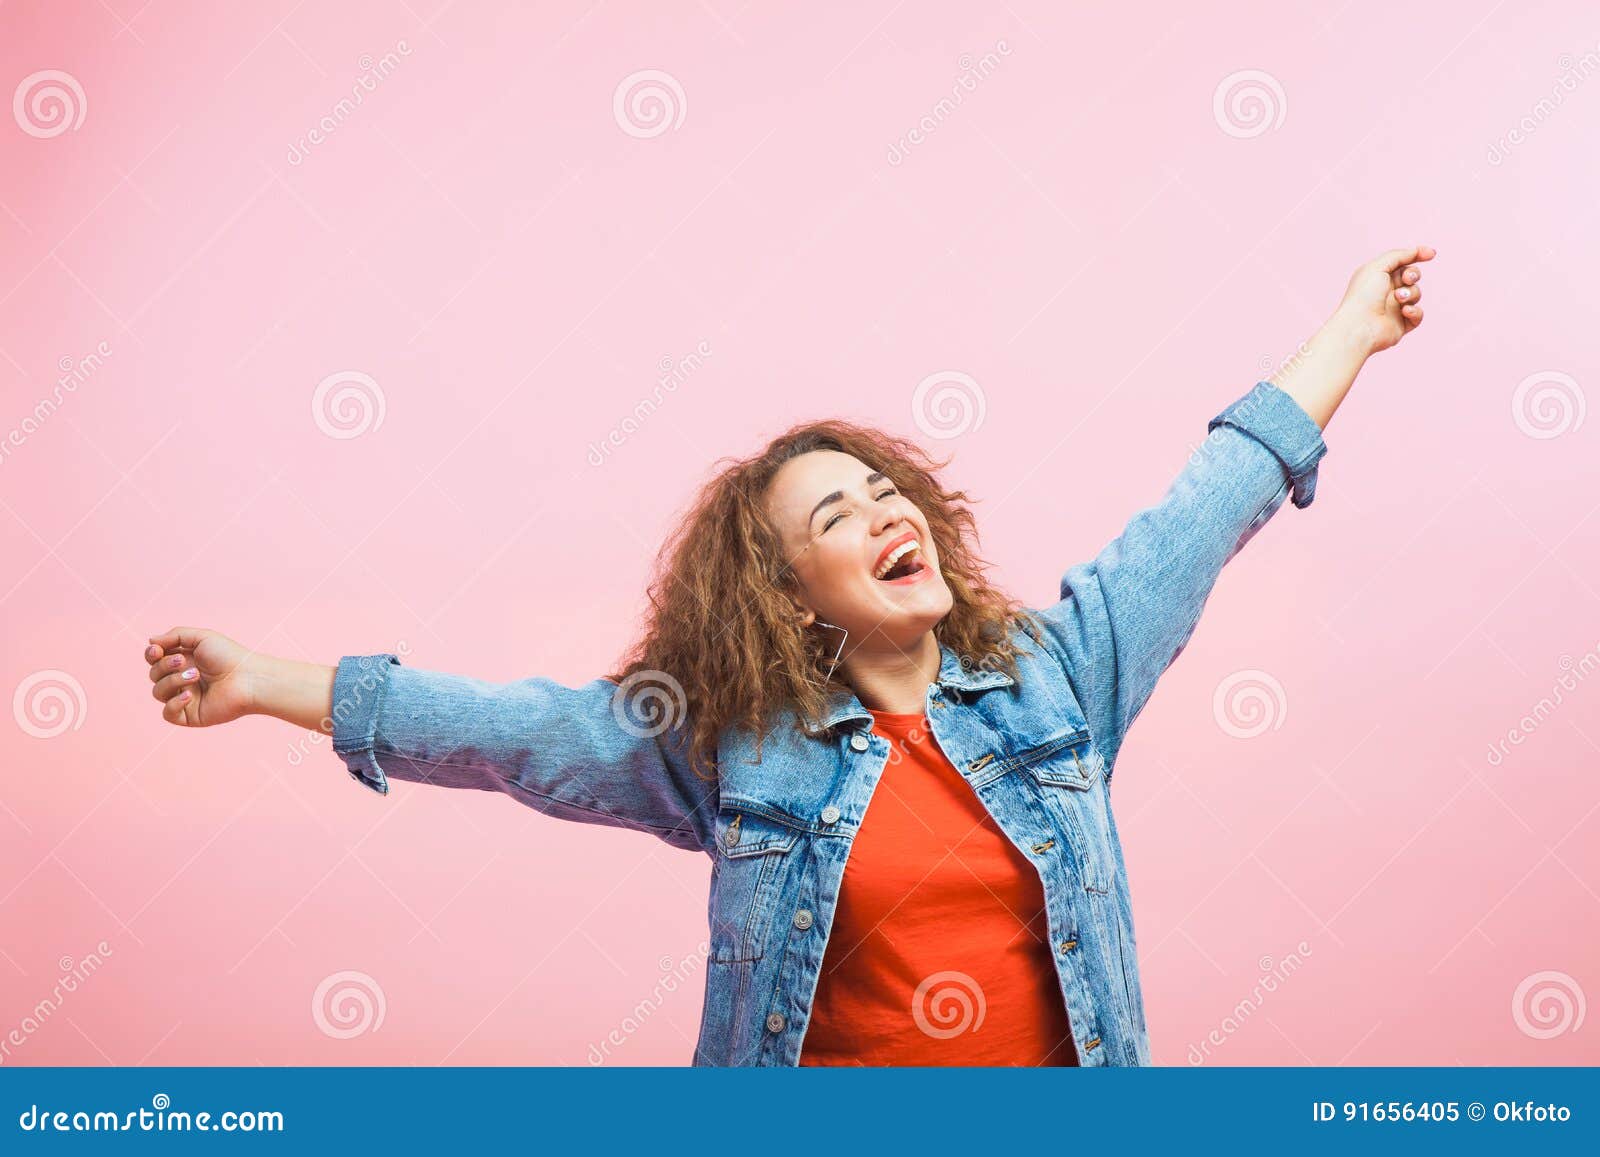 young and beautiful woman, happiness, success, emotion, joy